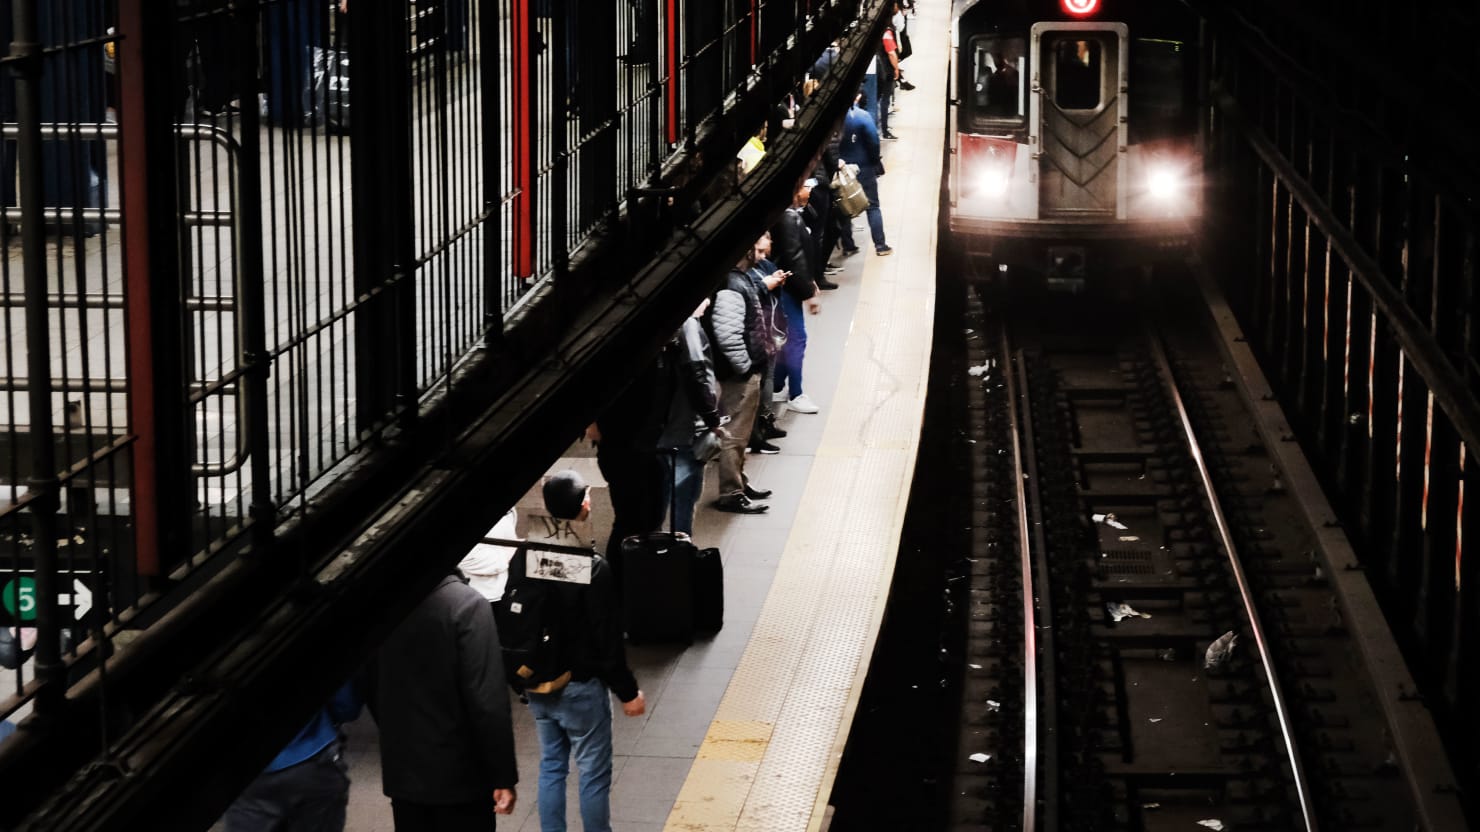 Police Nab suspect in deadly NYC subway with knife